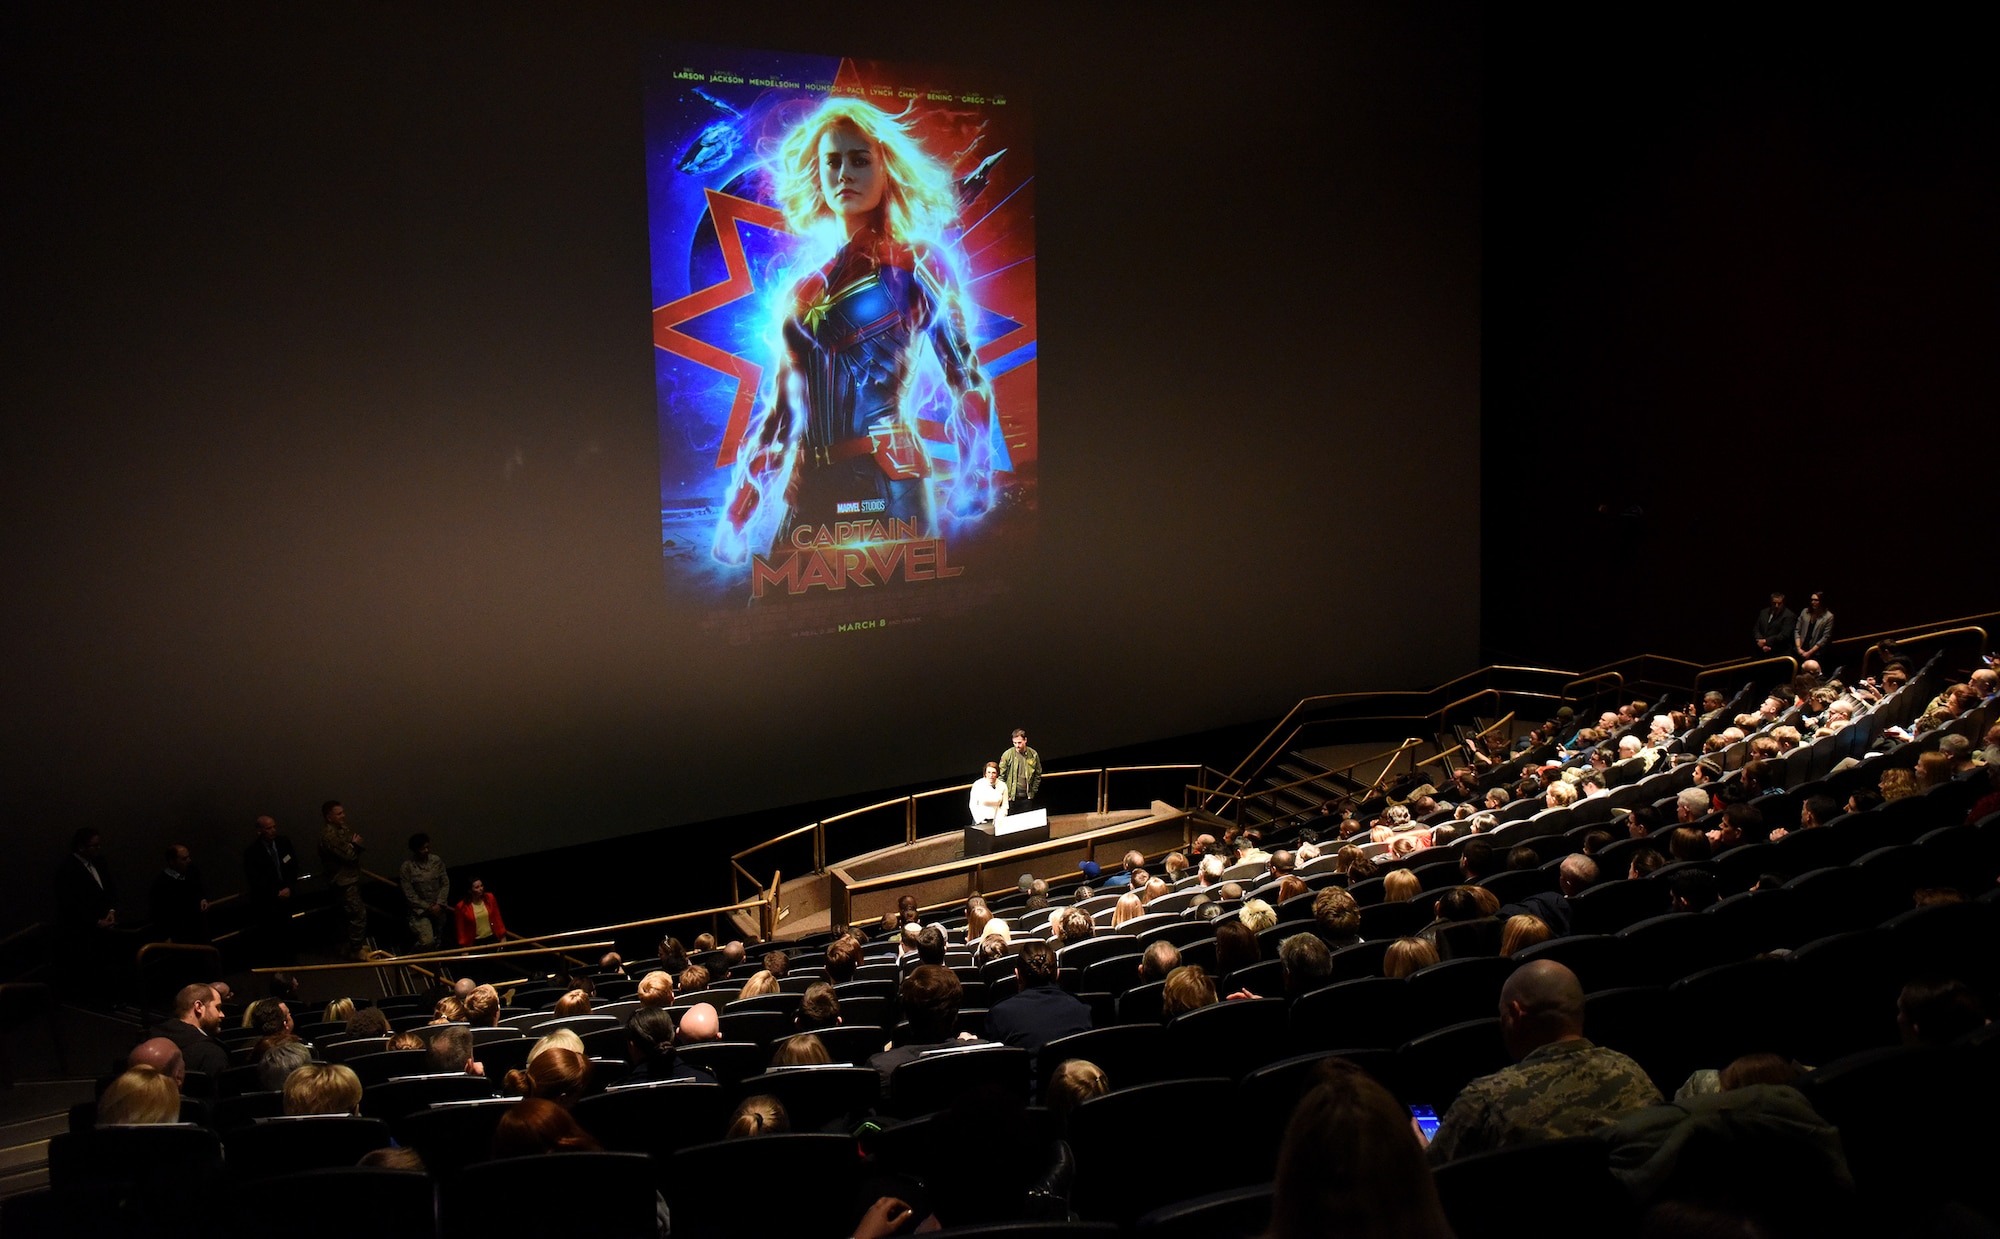 Anna Boden and Ryan Flack, “Captain Marvel” co-directors, give remarks during a screening of “Captain Marvel” in Washington, D.C., March 7, 2019. The screening was held to highlight Air Force collaboration with Disney and the inspiration behind the main character’s warrior ethos: “higher, further, faster.” (U.S. Air Force photo by Staff Sgt. Rusty Frank)